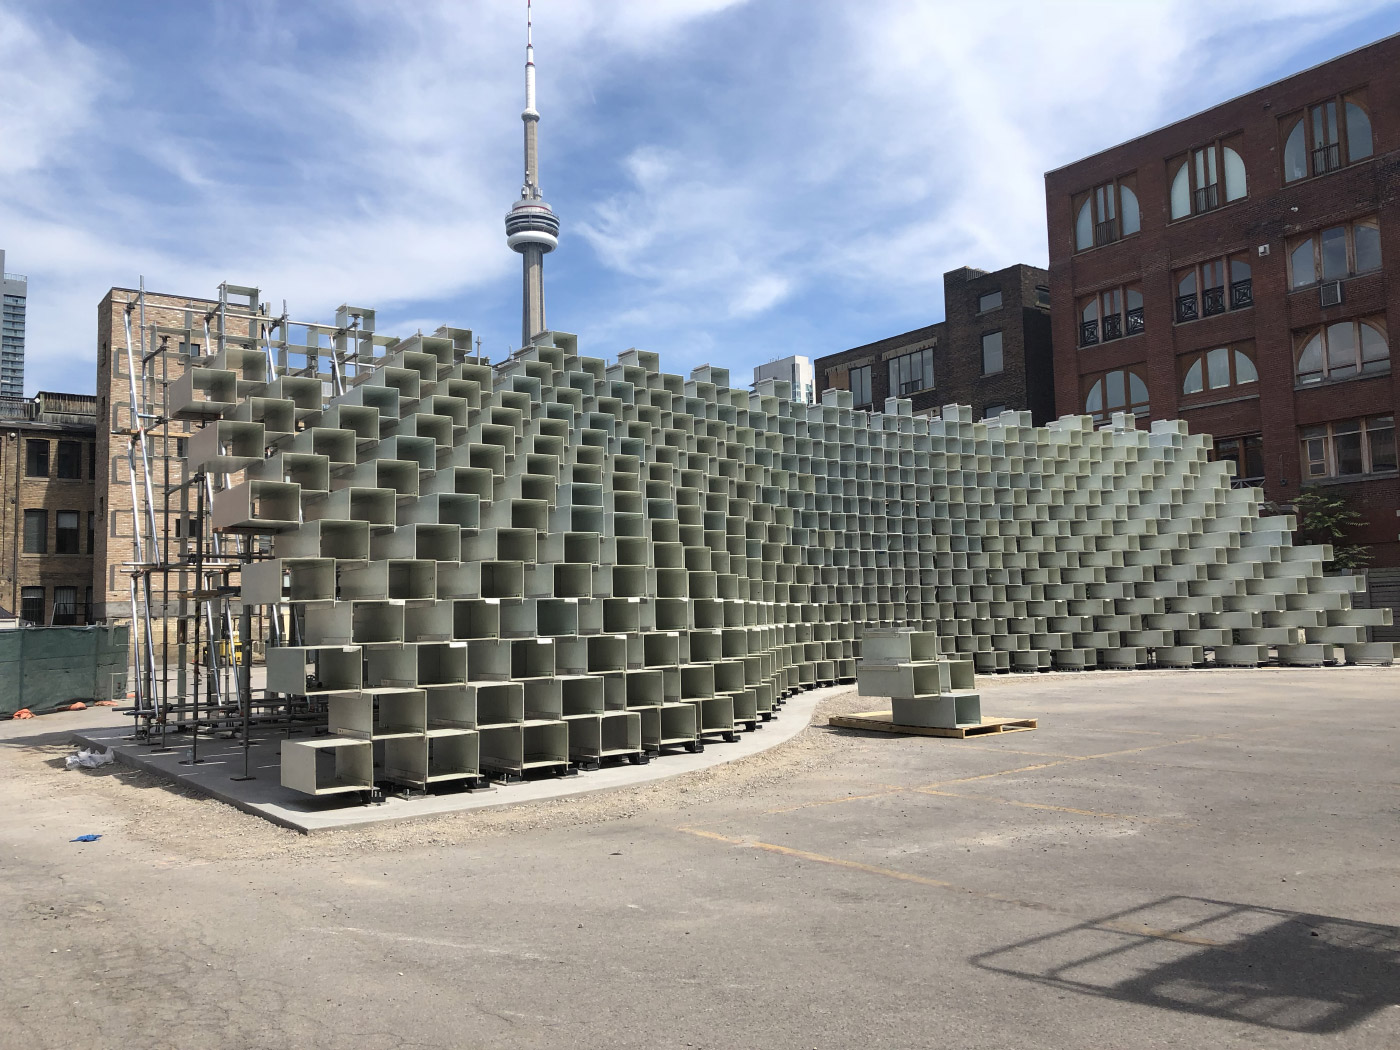 BIG's 2016 Serpentine pavilion being reconstructed in front of CN Tower. (Courtesy Westbank)